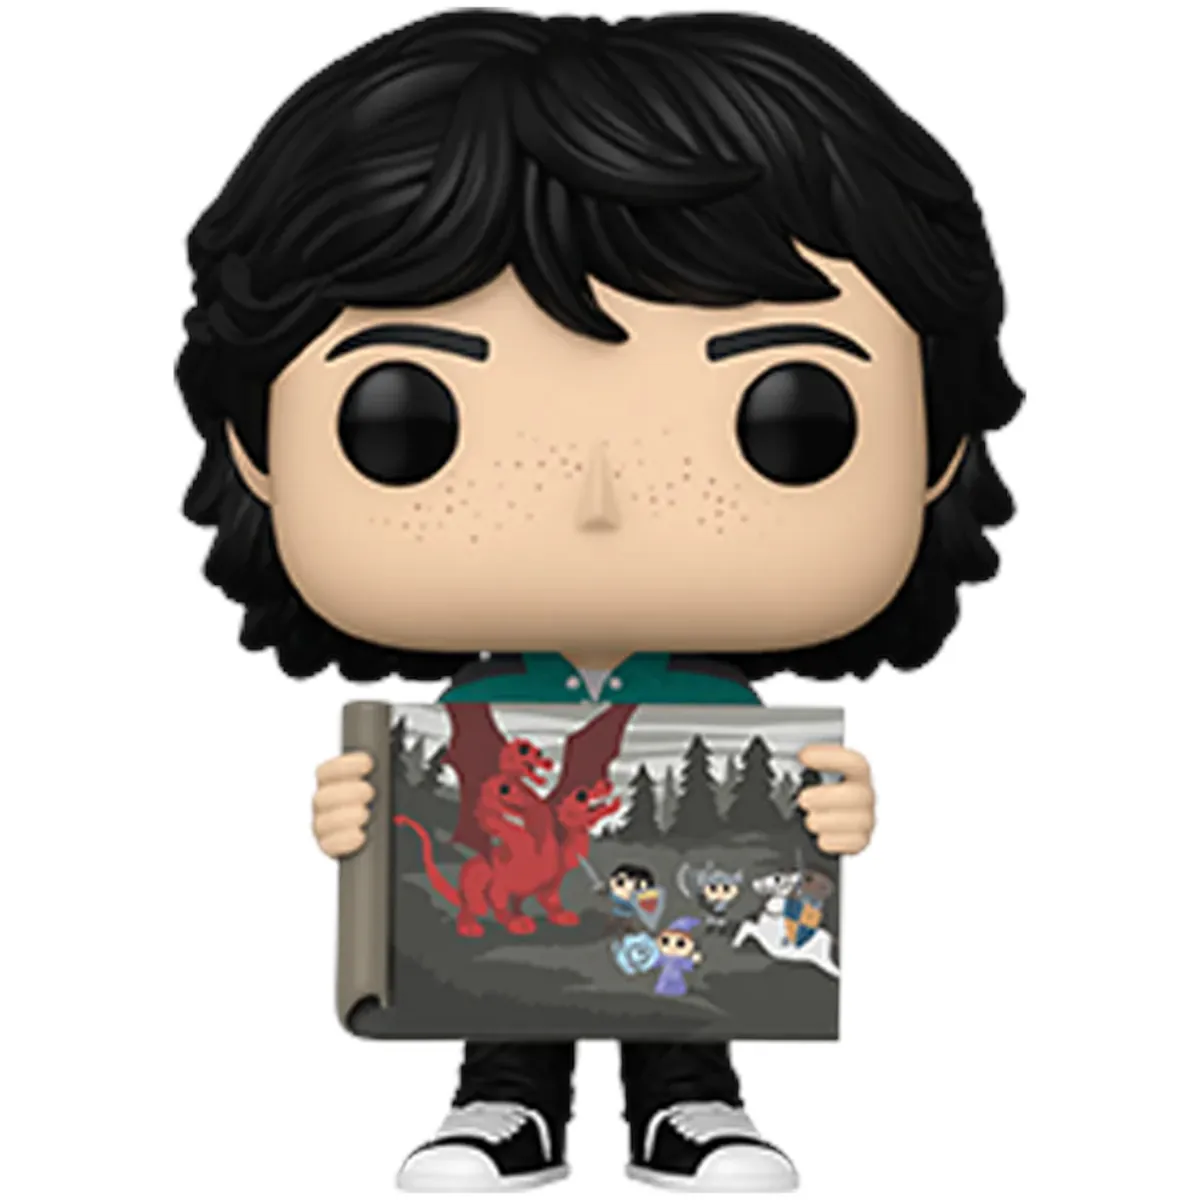 80137 Funko Pop! Television - Stranger Things (Season 4) - Mike (With Will’s Painting) Collectable Vinyl Figure